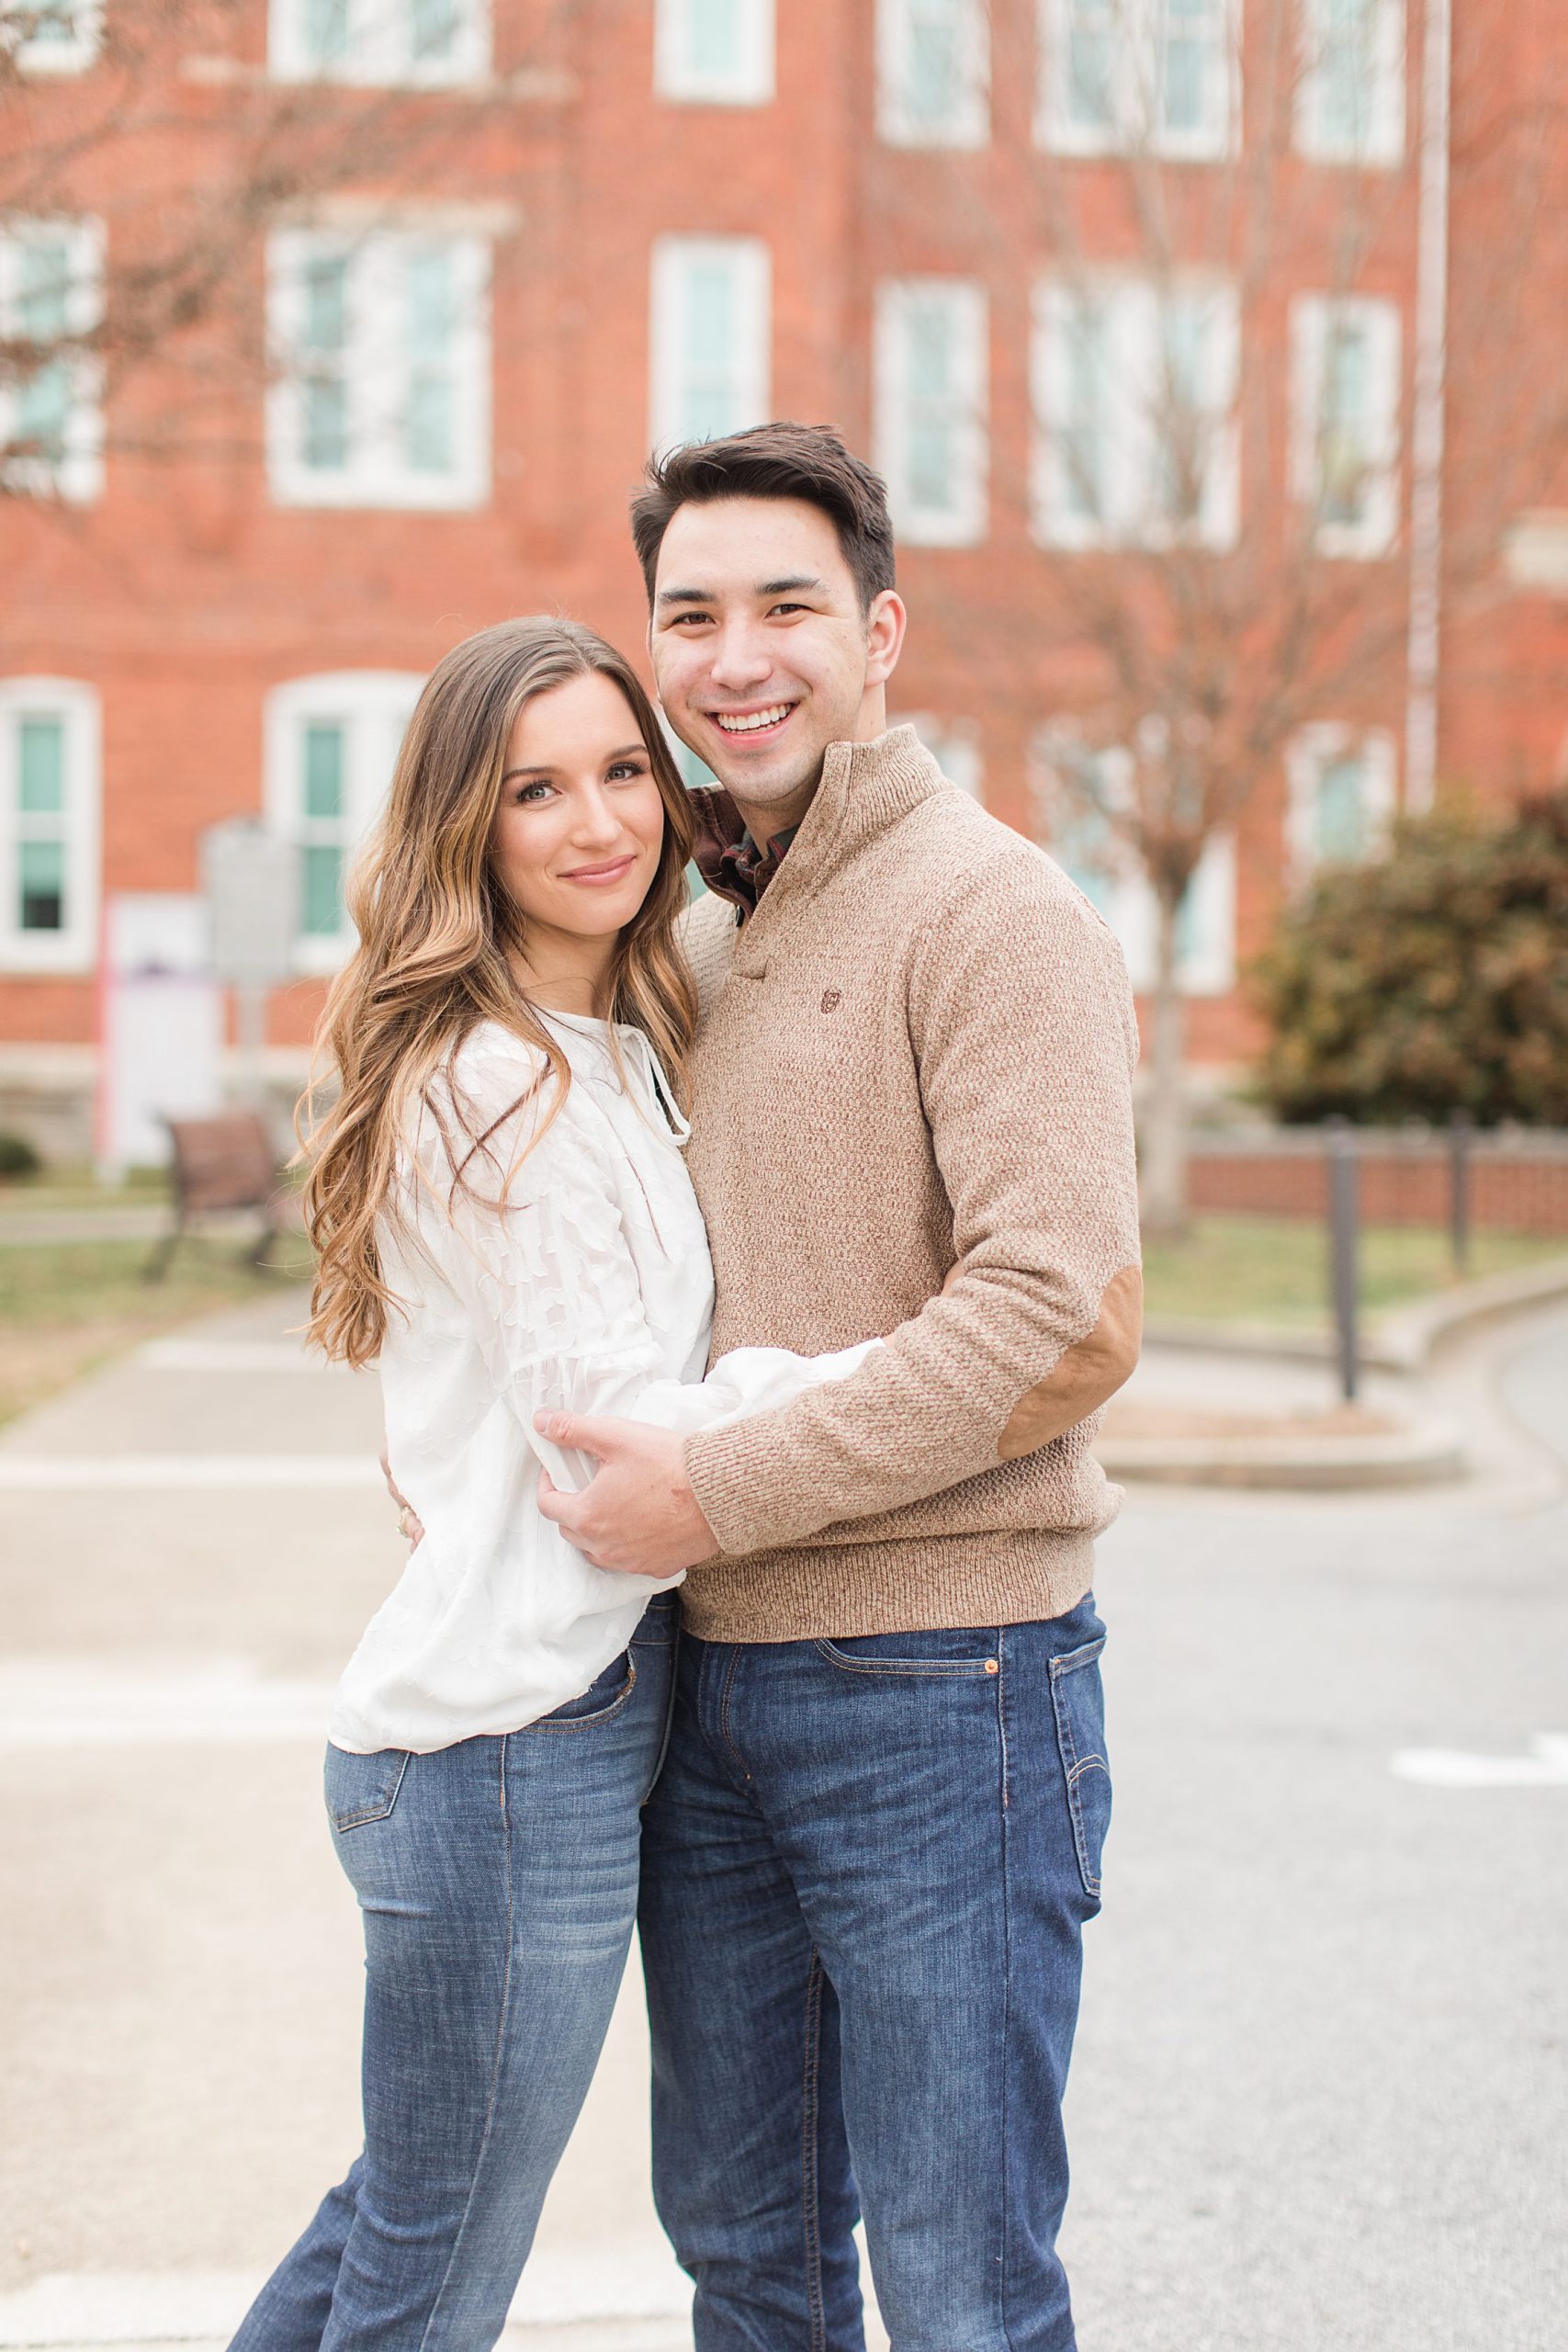 The Couple happy in front of Clemson Campus